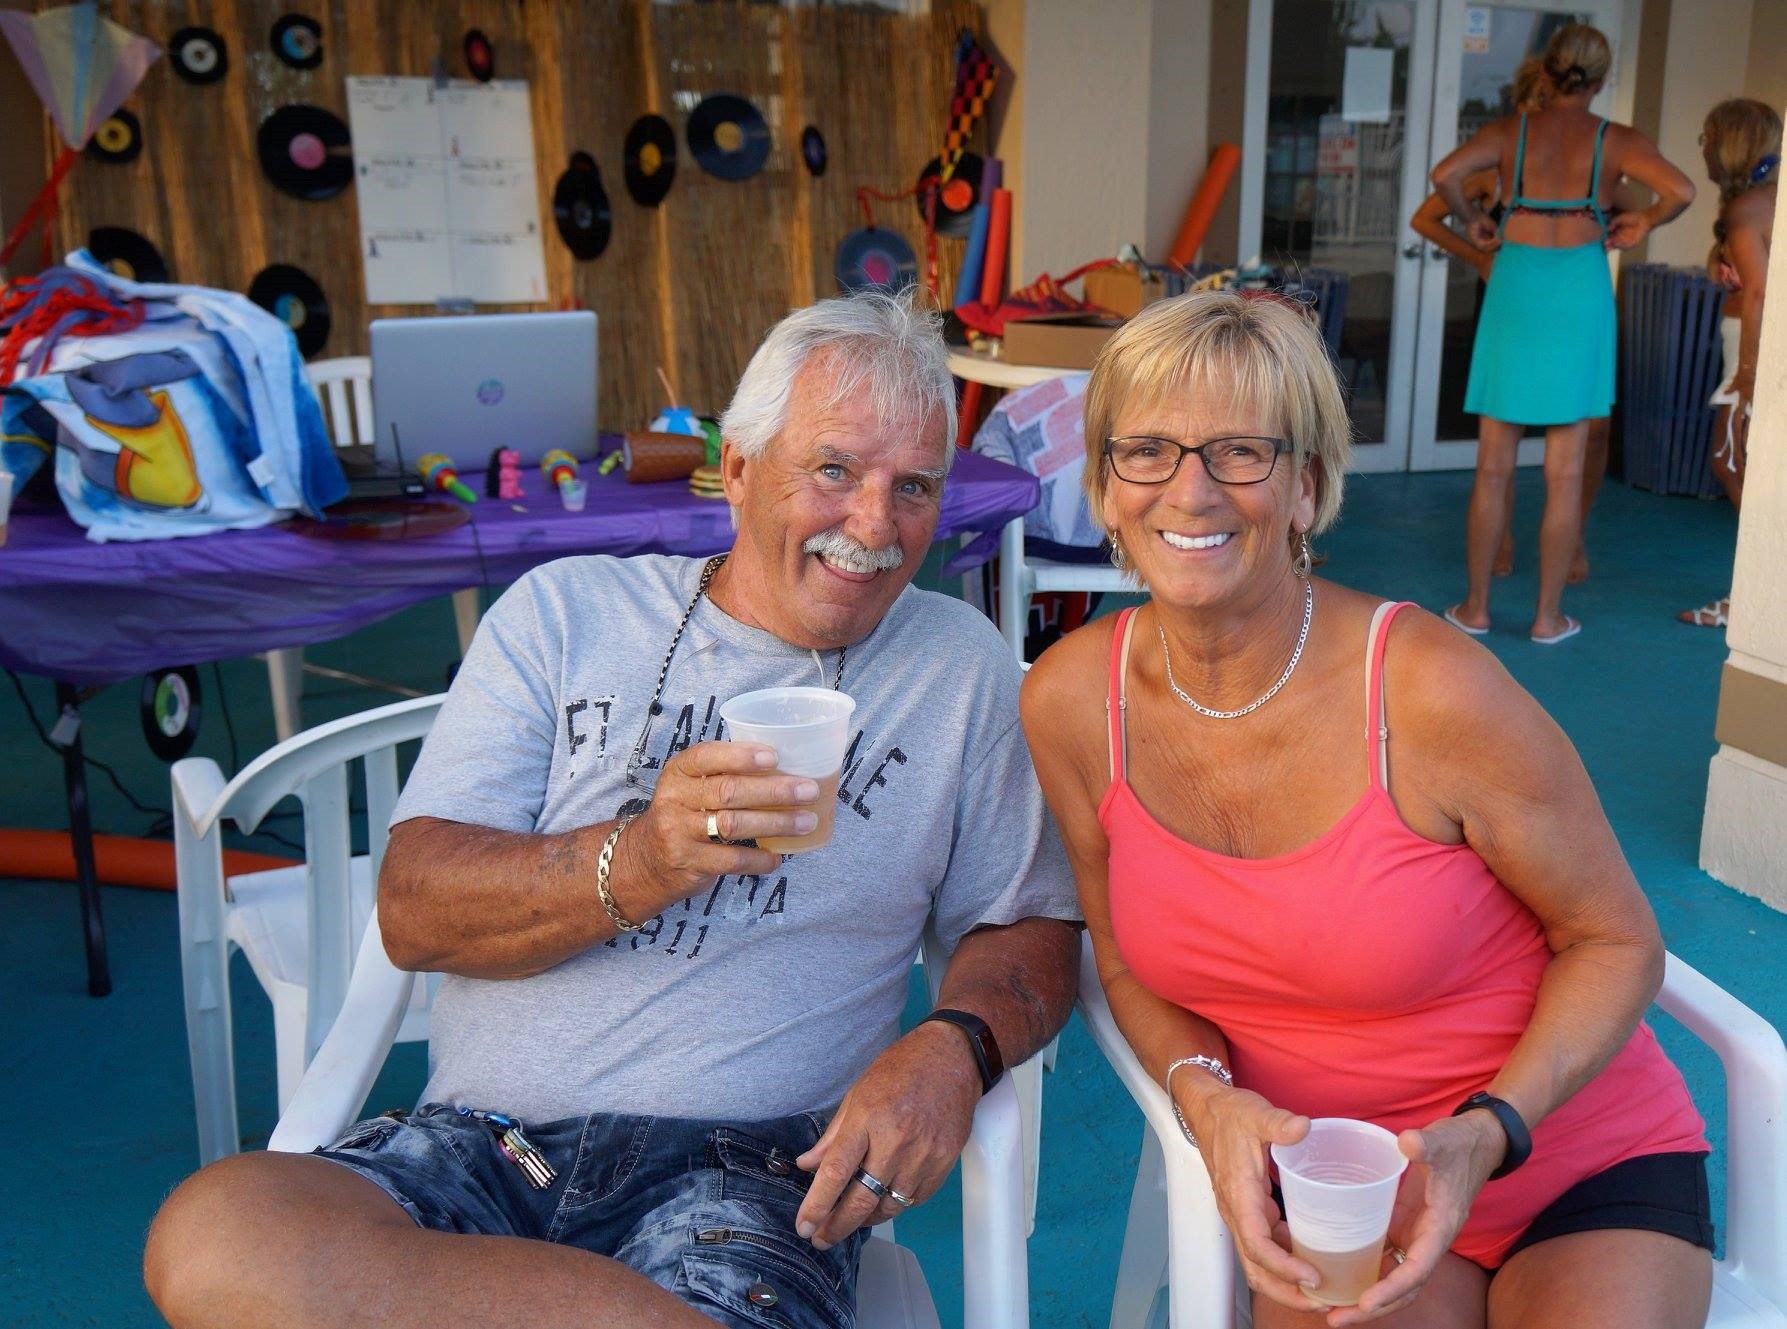 A senior couple drink beer from plastic cups at a resort.